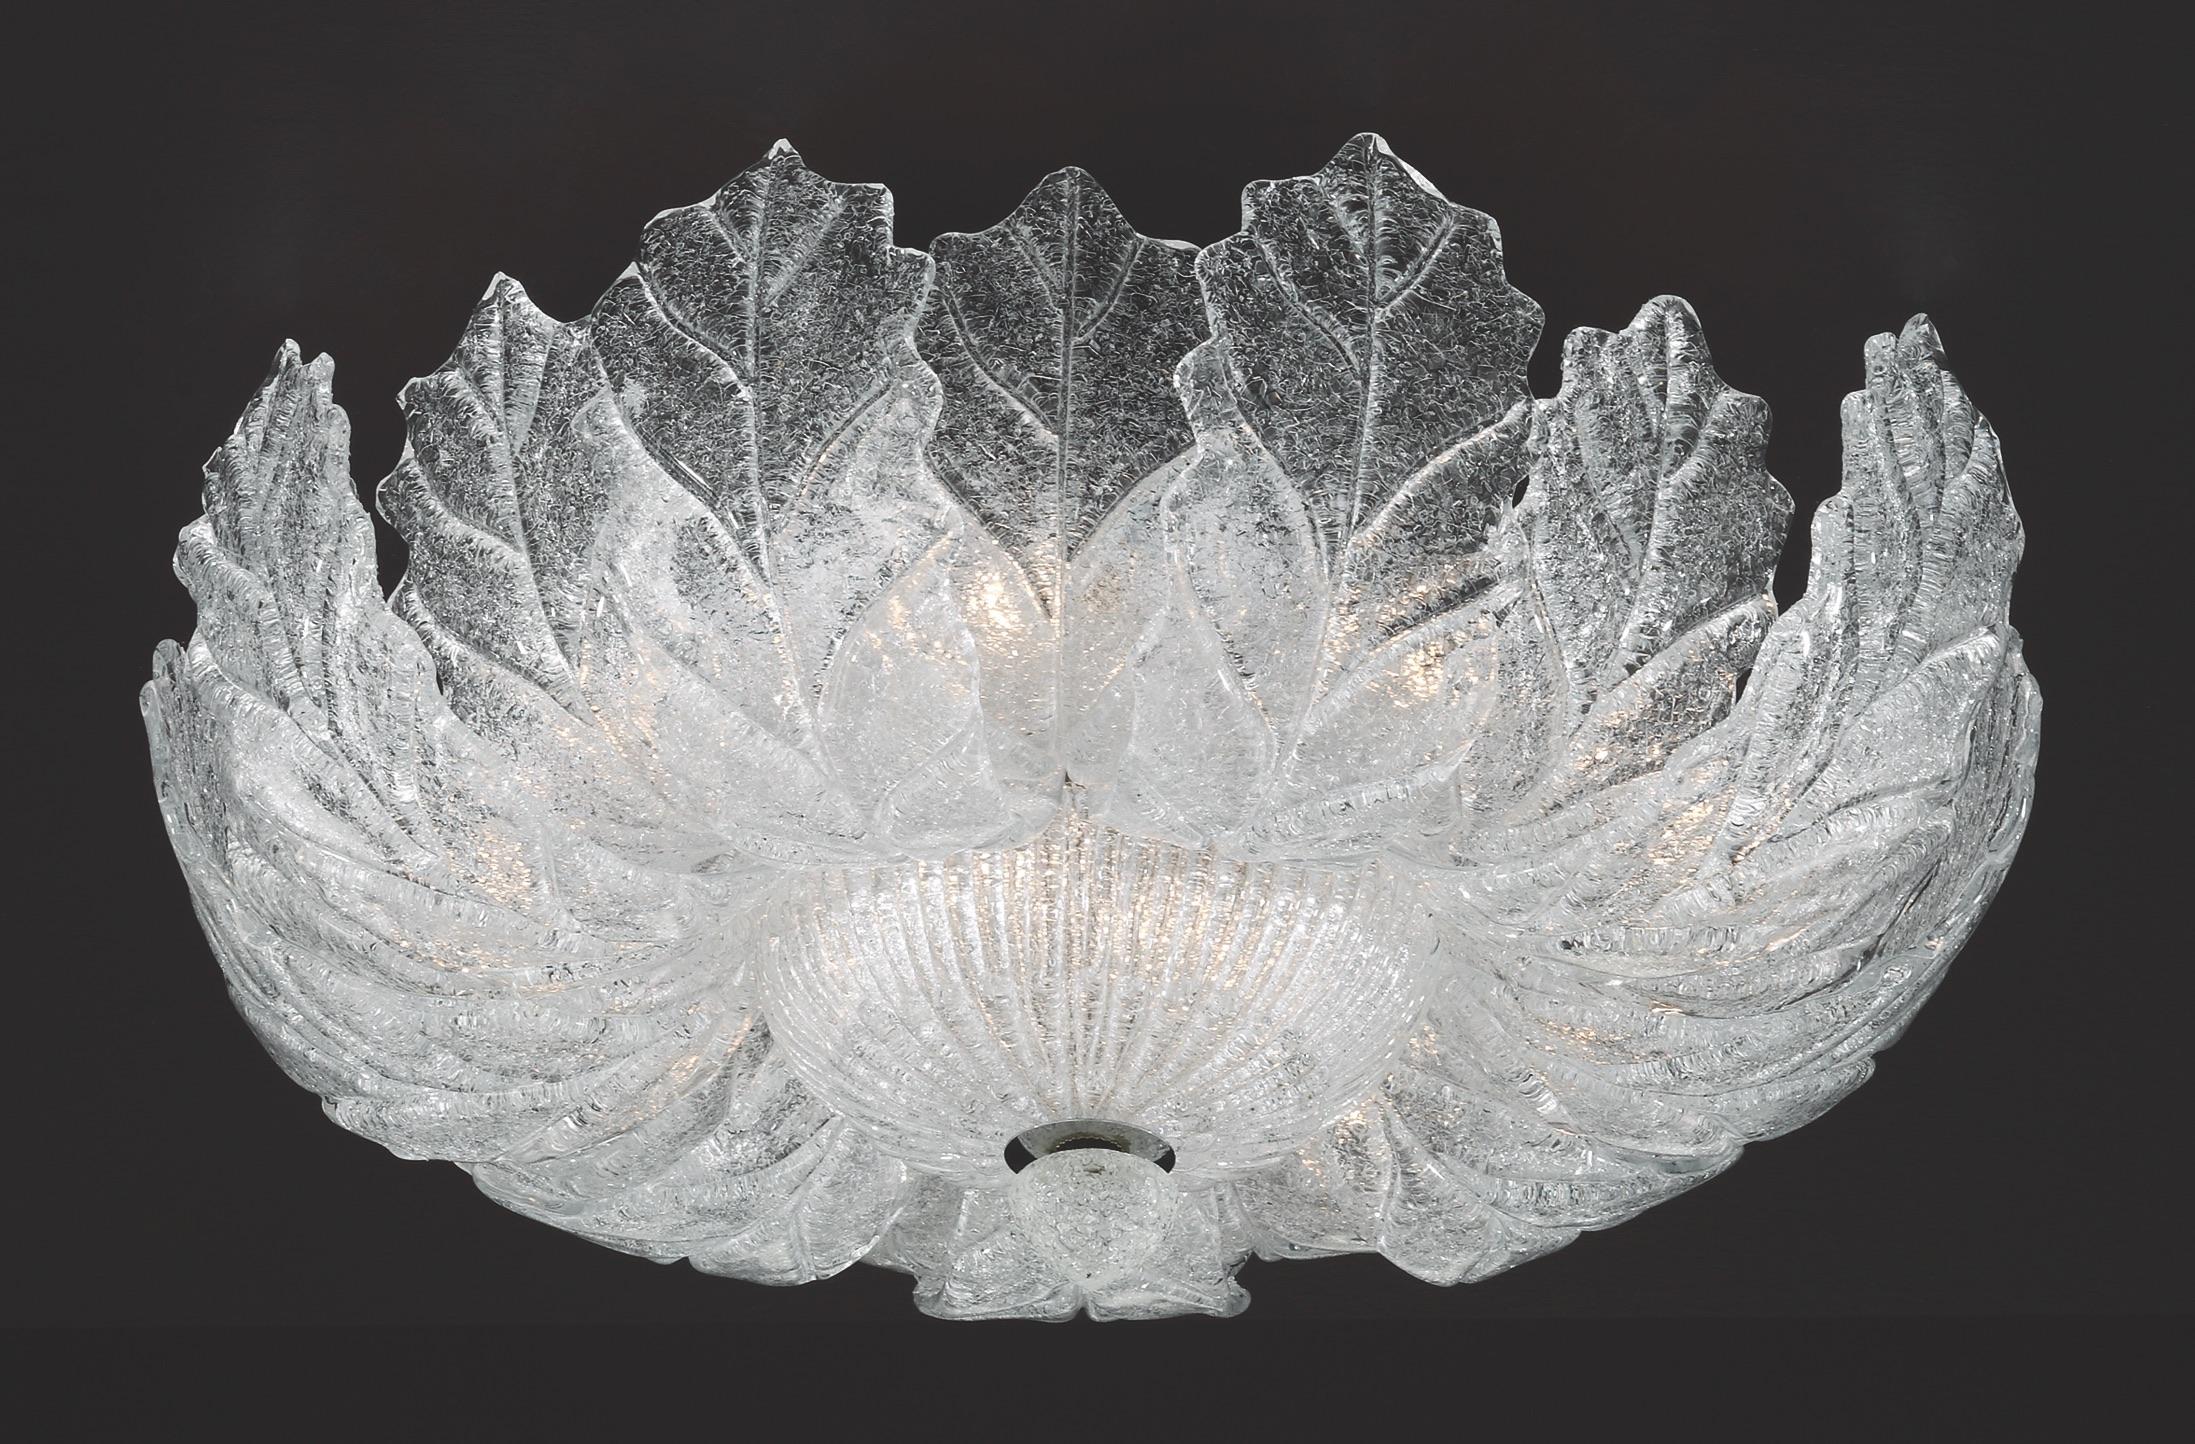 Italian flush mount with clear Murano glass leaves hand blown in Graniglia technique to produce a granular textured effect, mounted on chrome finish metal frame by Fabio Ltd / Made in Italy
11 lights / E12 or E14 type / max 40W each
Measures: